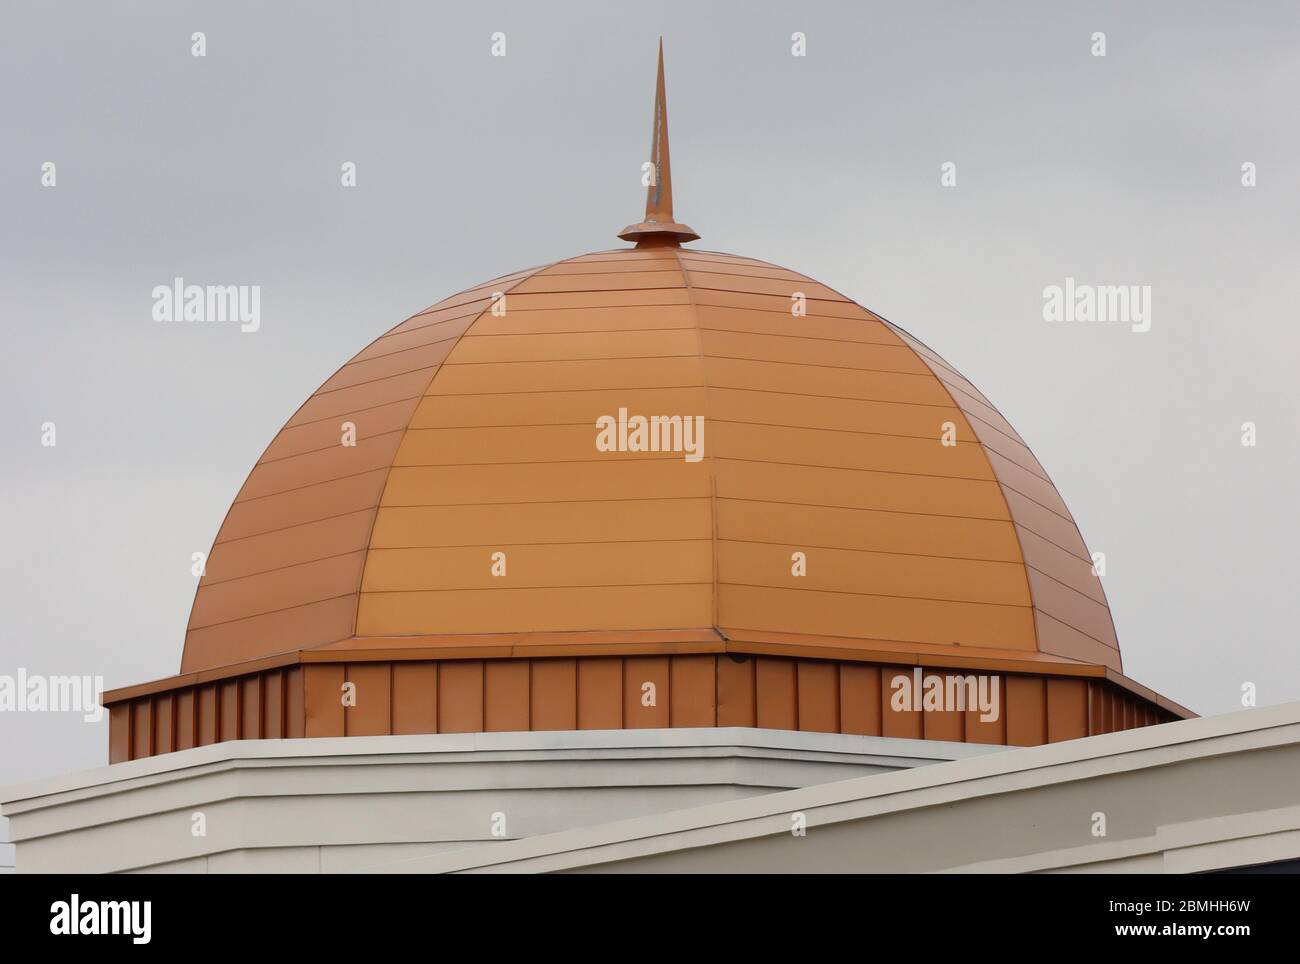 This structure has a domed roof. Stock Photo